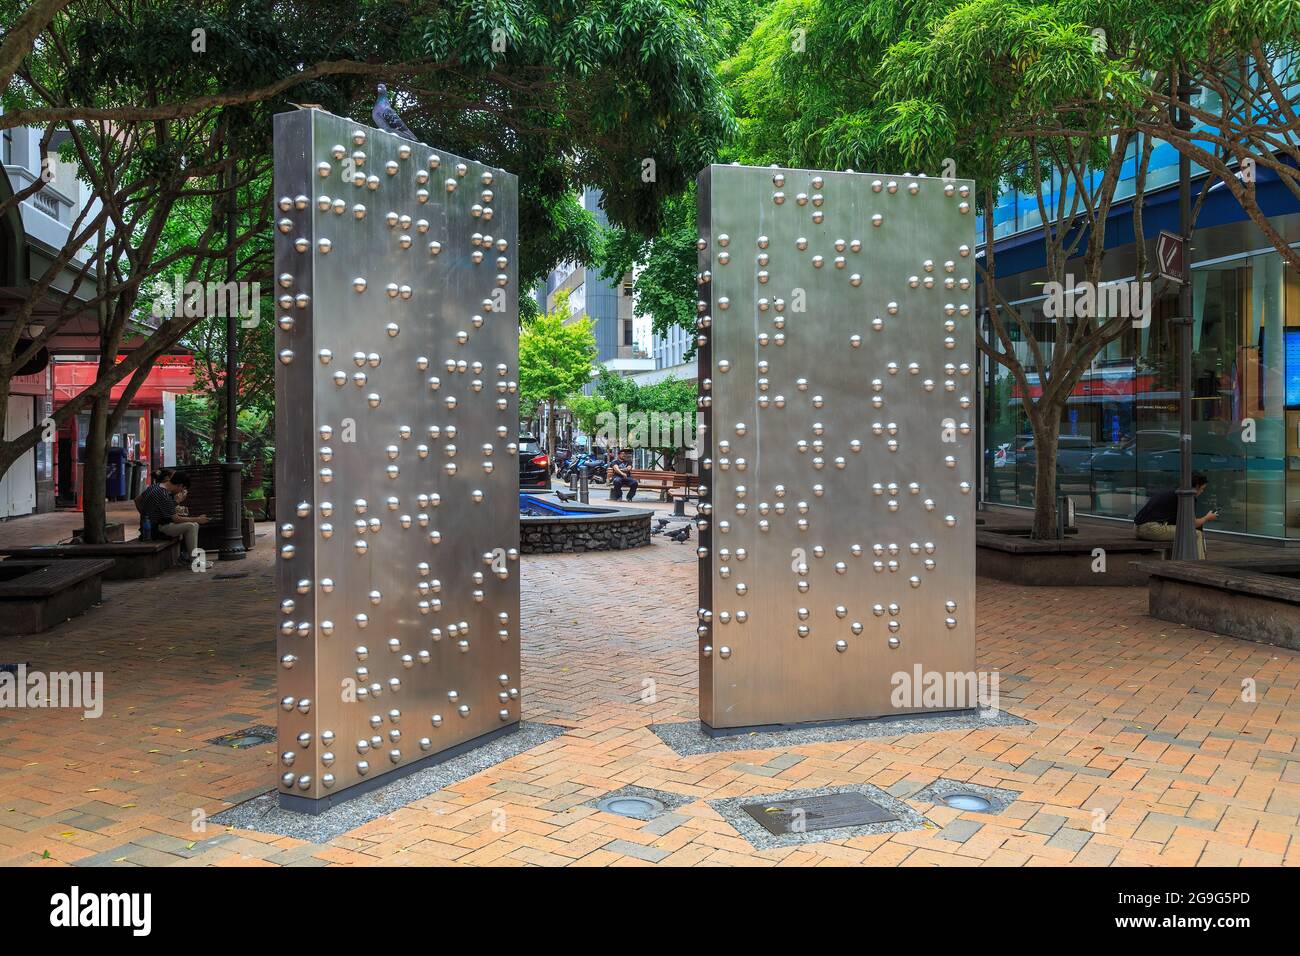 Public artwork in Wellington, New Zealand. A sculpture called 'Invisible City', with a poem written in braille, in the Wellington CBD Stock Photo